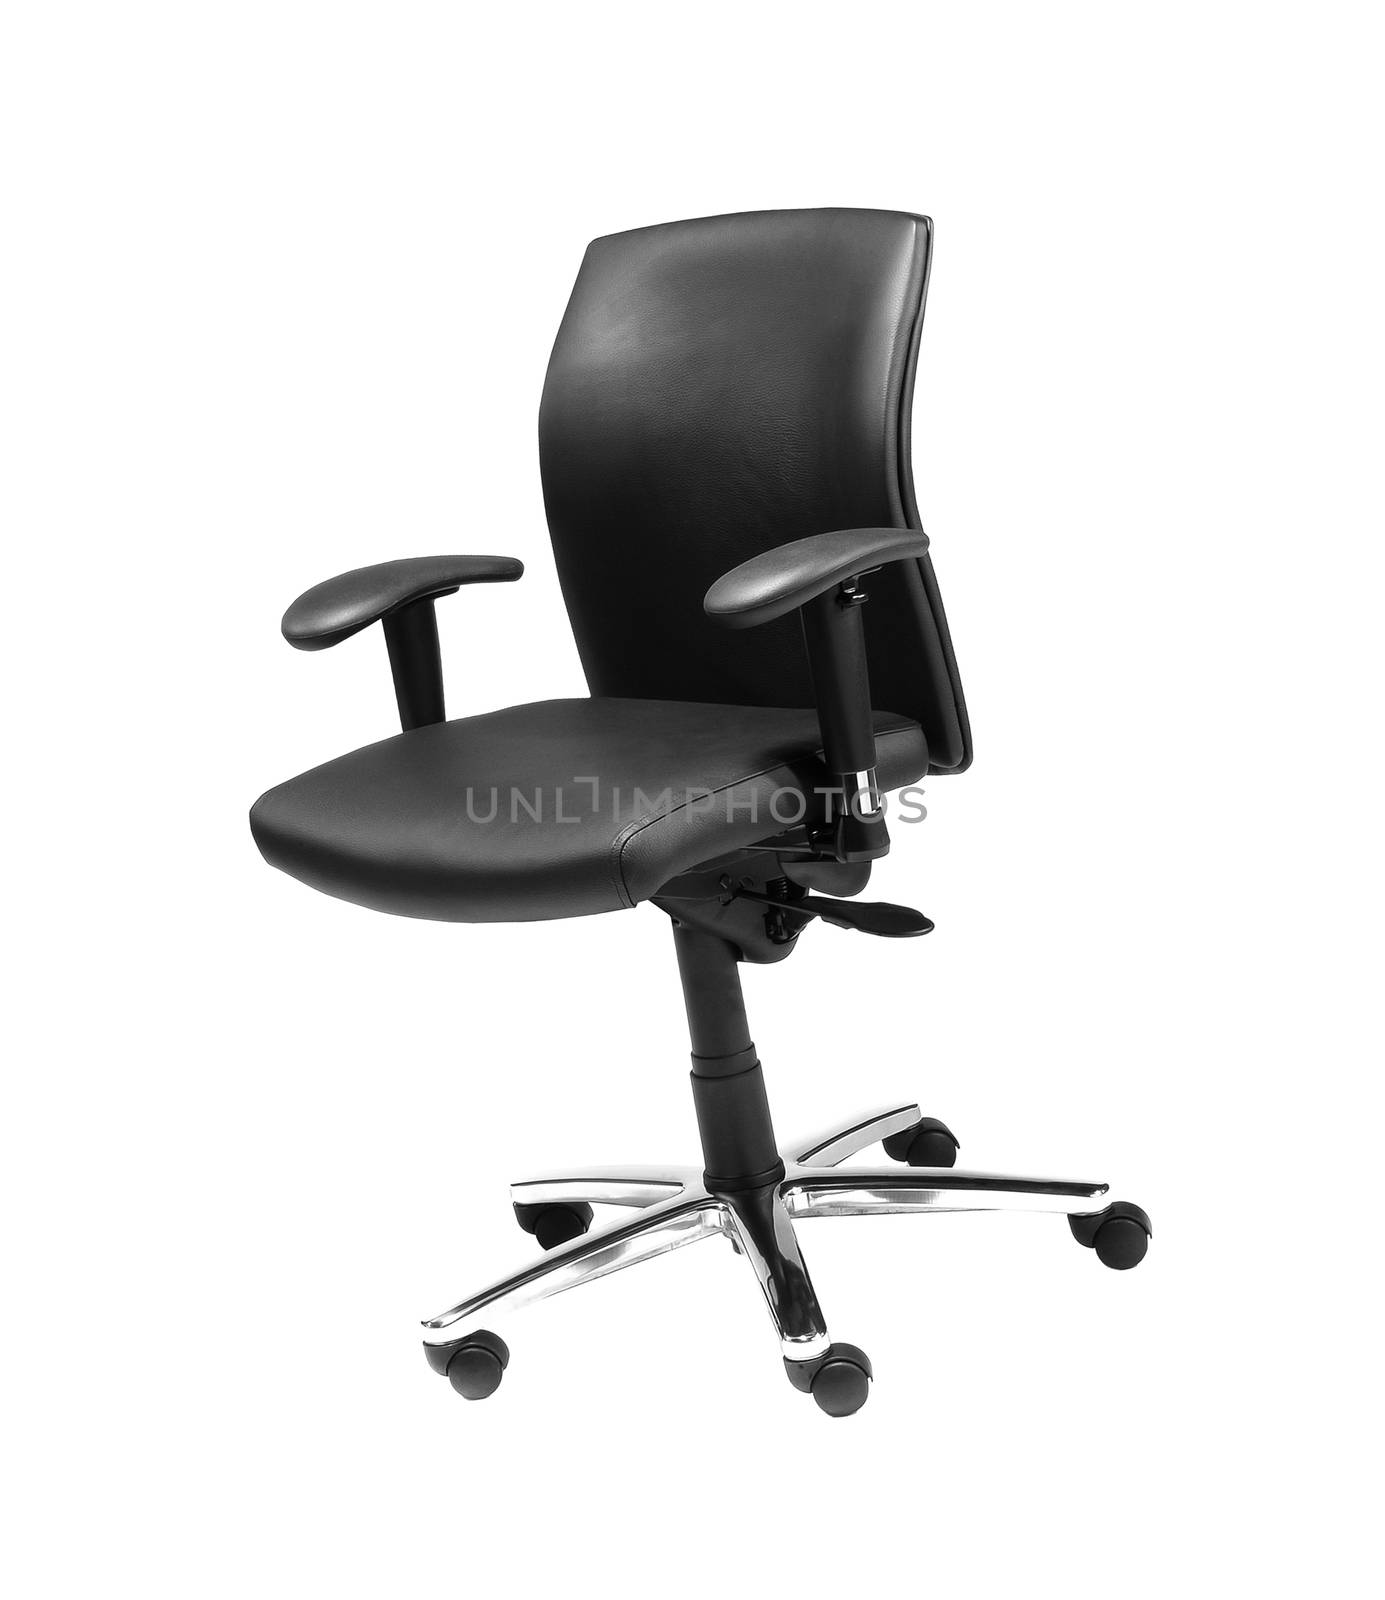 black leather chair over white background